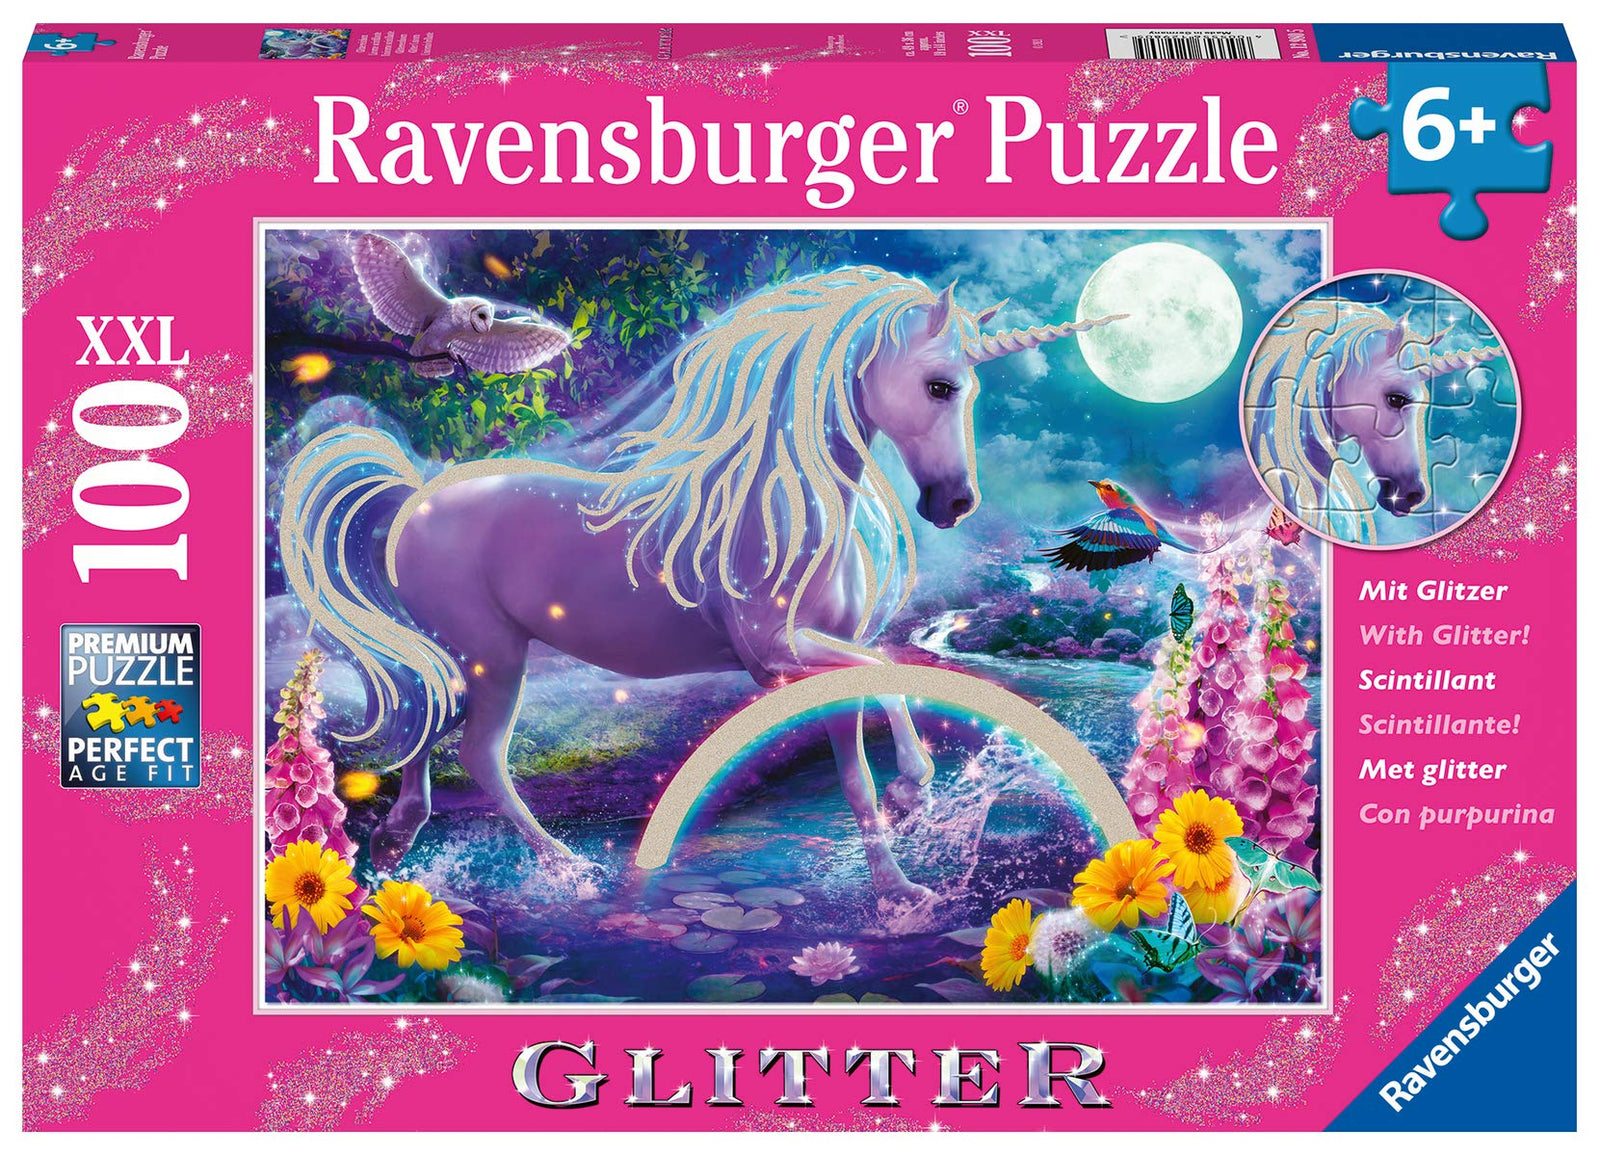 Ravensburger Glitter Unicorn 100 Piece Puzzles for Kids, Every Piece is Unique, Pieces Fit Together Perfectly